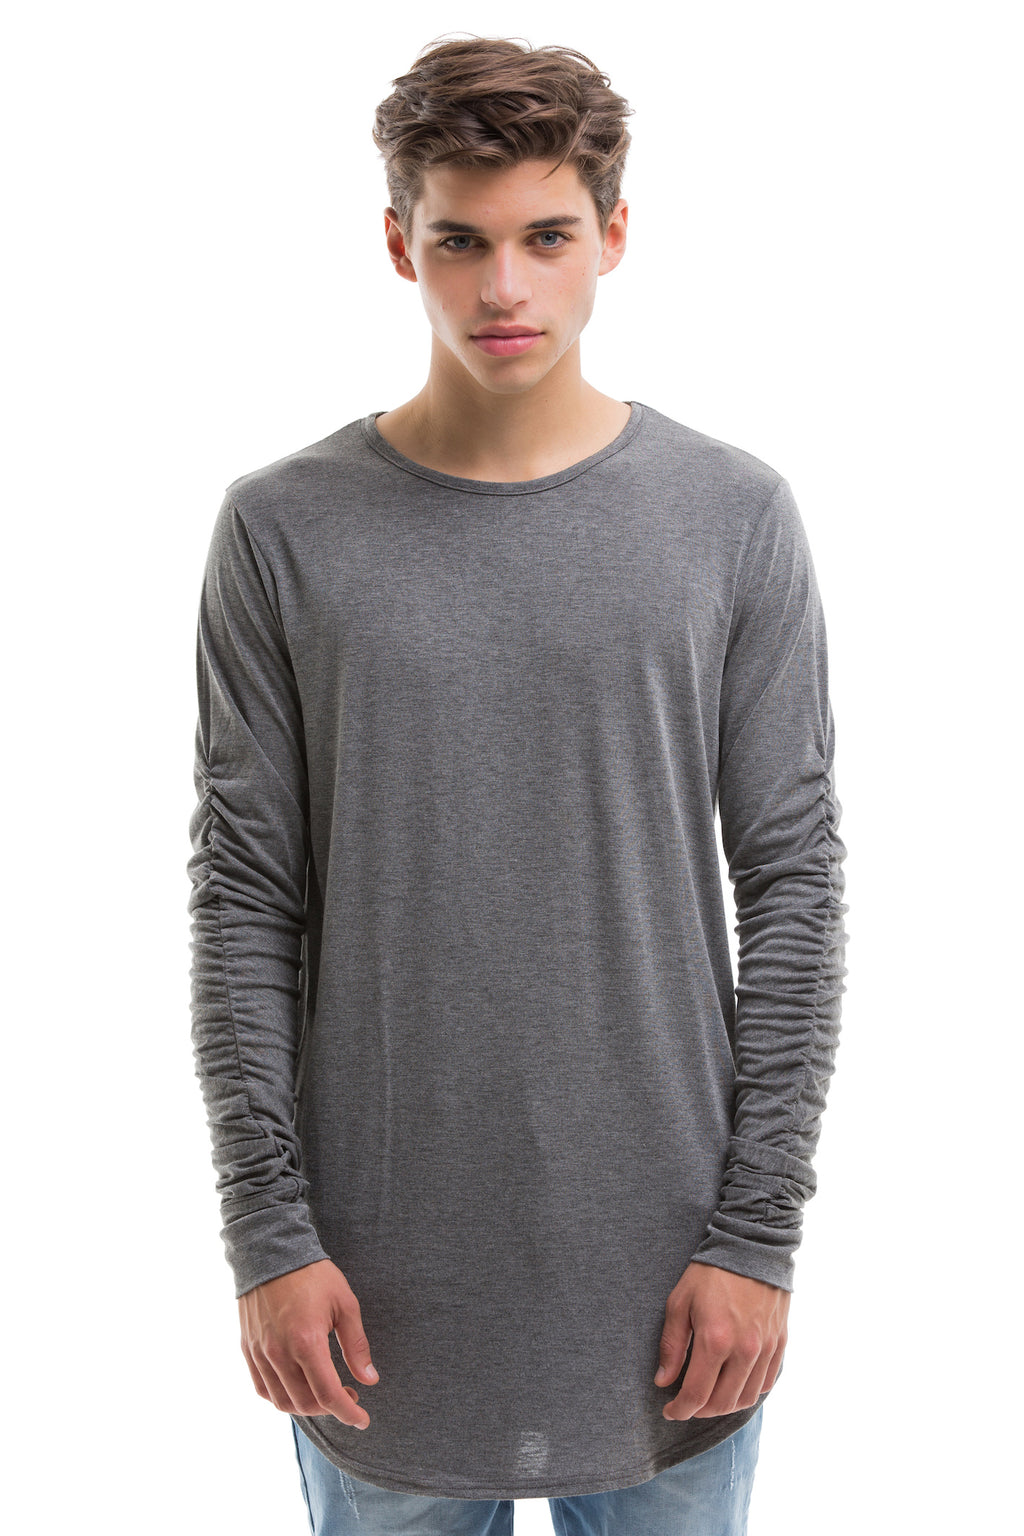 Grey Scoop Cut Long Sleeve T Shirt With Double Cuffed Sleeve Ends - Front View